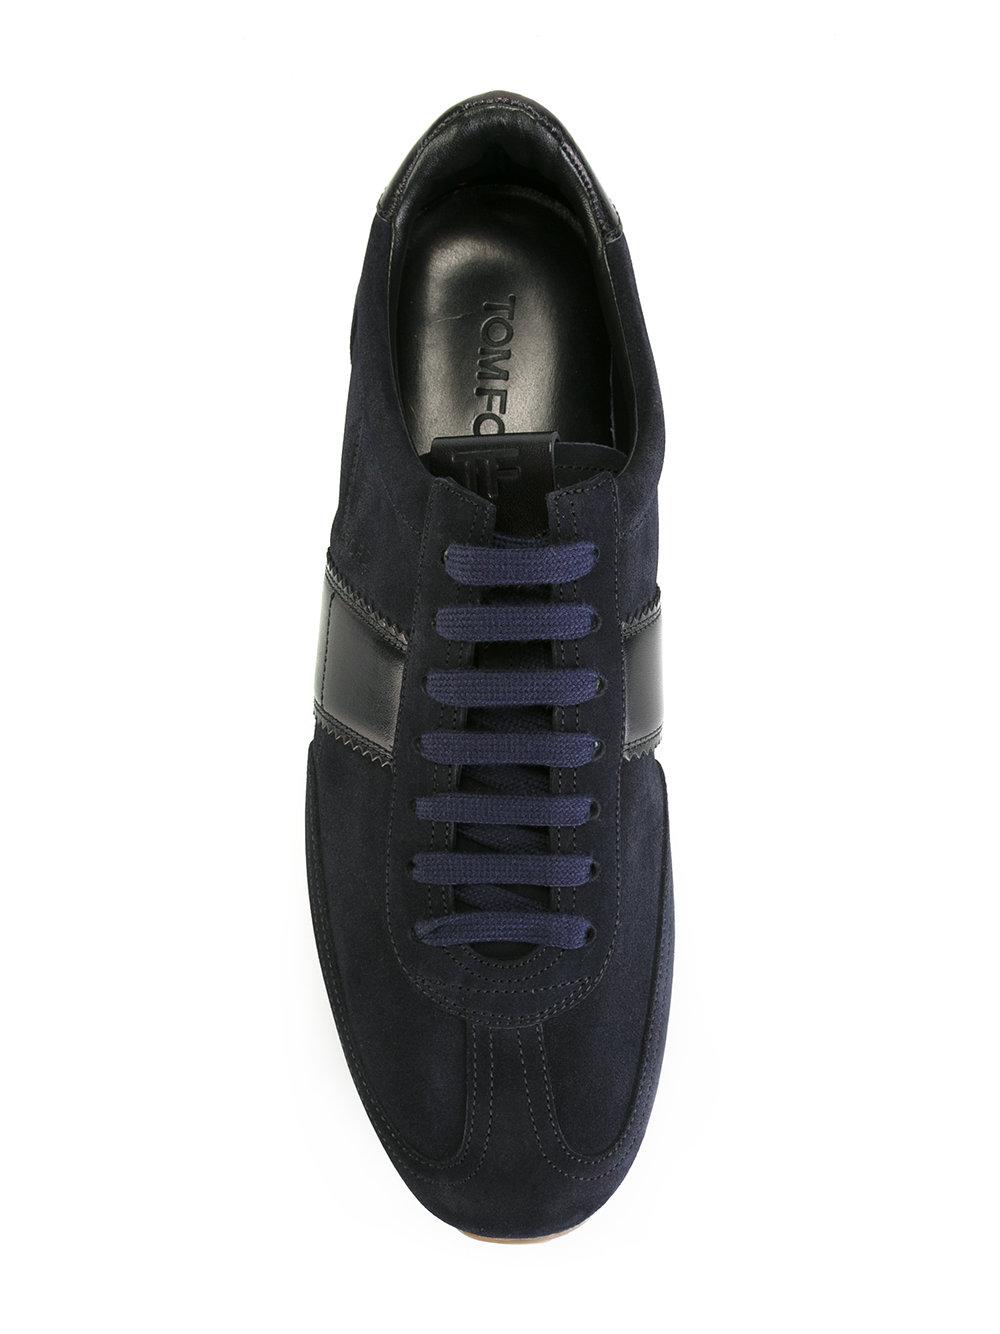 Lyst - Tom Ford Oxford Sneakers in Blue for Men